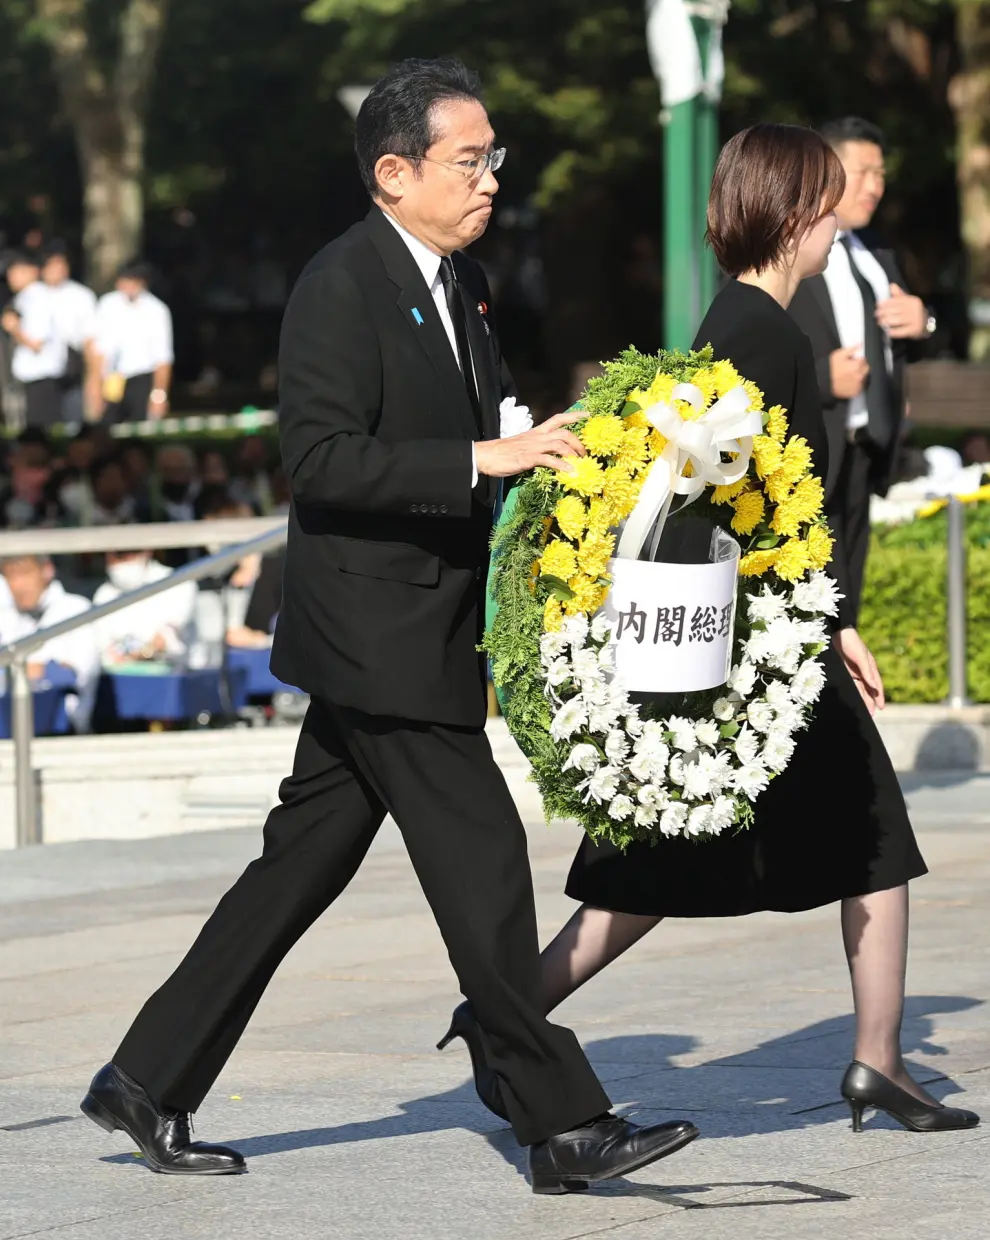 Hiroshima (Japan), 05/08/2023.- Japanese Prime Minister Fumio Kishida lays a wreath for victims of the atomic bombing of Hiroshima during the memorial service at Hiroshima Peace Memorial Park in Hiroshima, Hiroshima Prefecture, western Japan, 06 August 2023, marking the 78th anniversary of the atomic bombing. Hiroshima City has announced the toll of victims from the atomic bombing rose to about 140,000. The number of victims was counted as the end of 1945 after the August 6 bombing. (Japón) EFE/EPA/JIJI PRESS JAPAN OUT EDITORIAL USE ONLY
